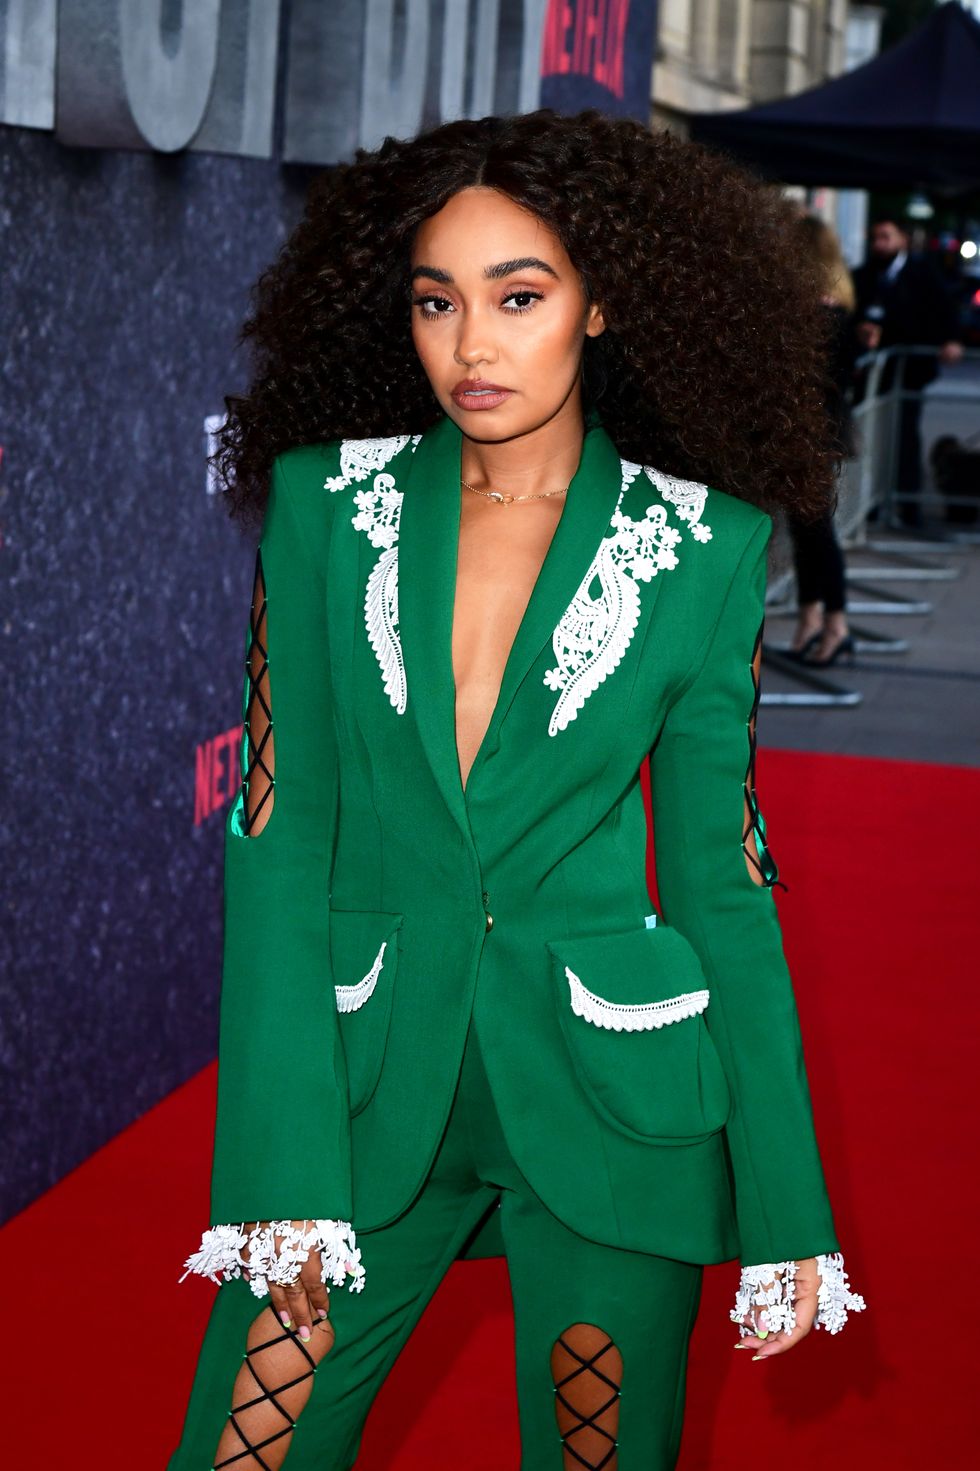 Leigh-Anne Pinnock who has said she used to feel "scared" to speak out about racism.